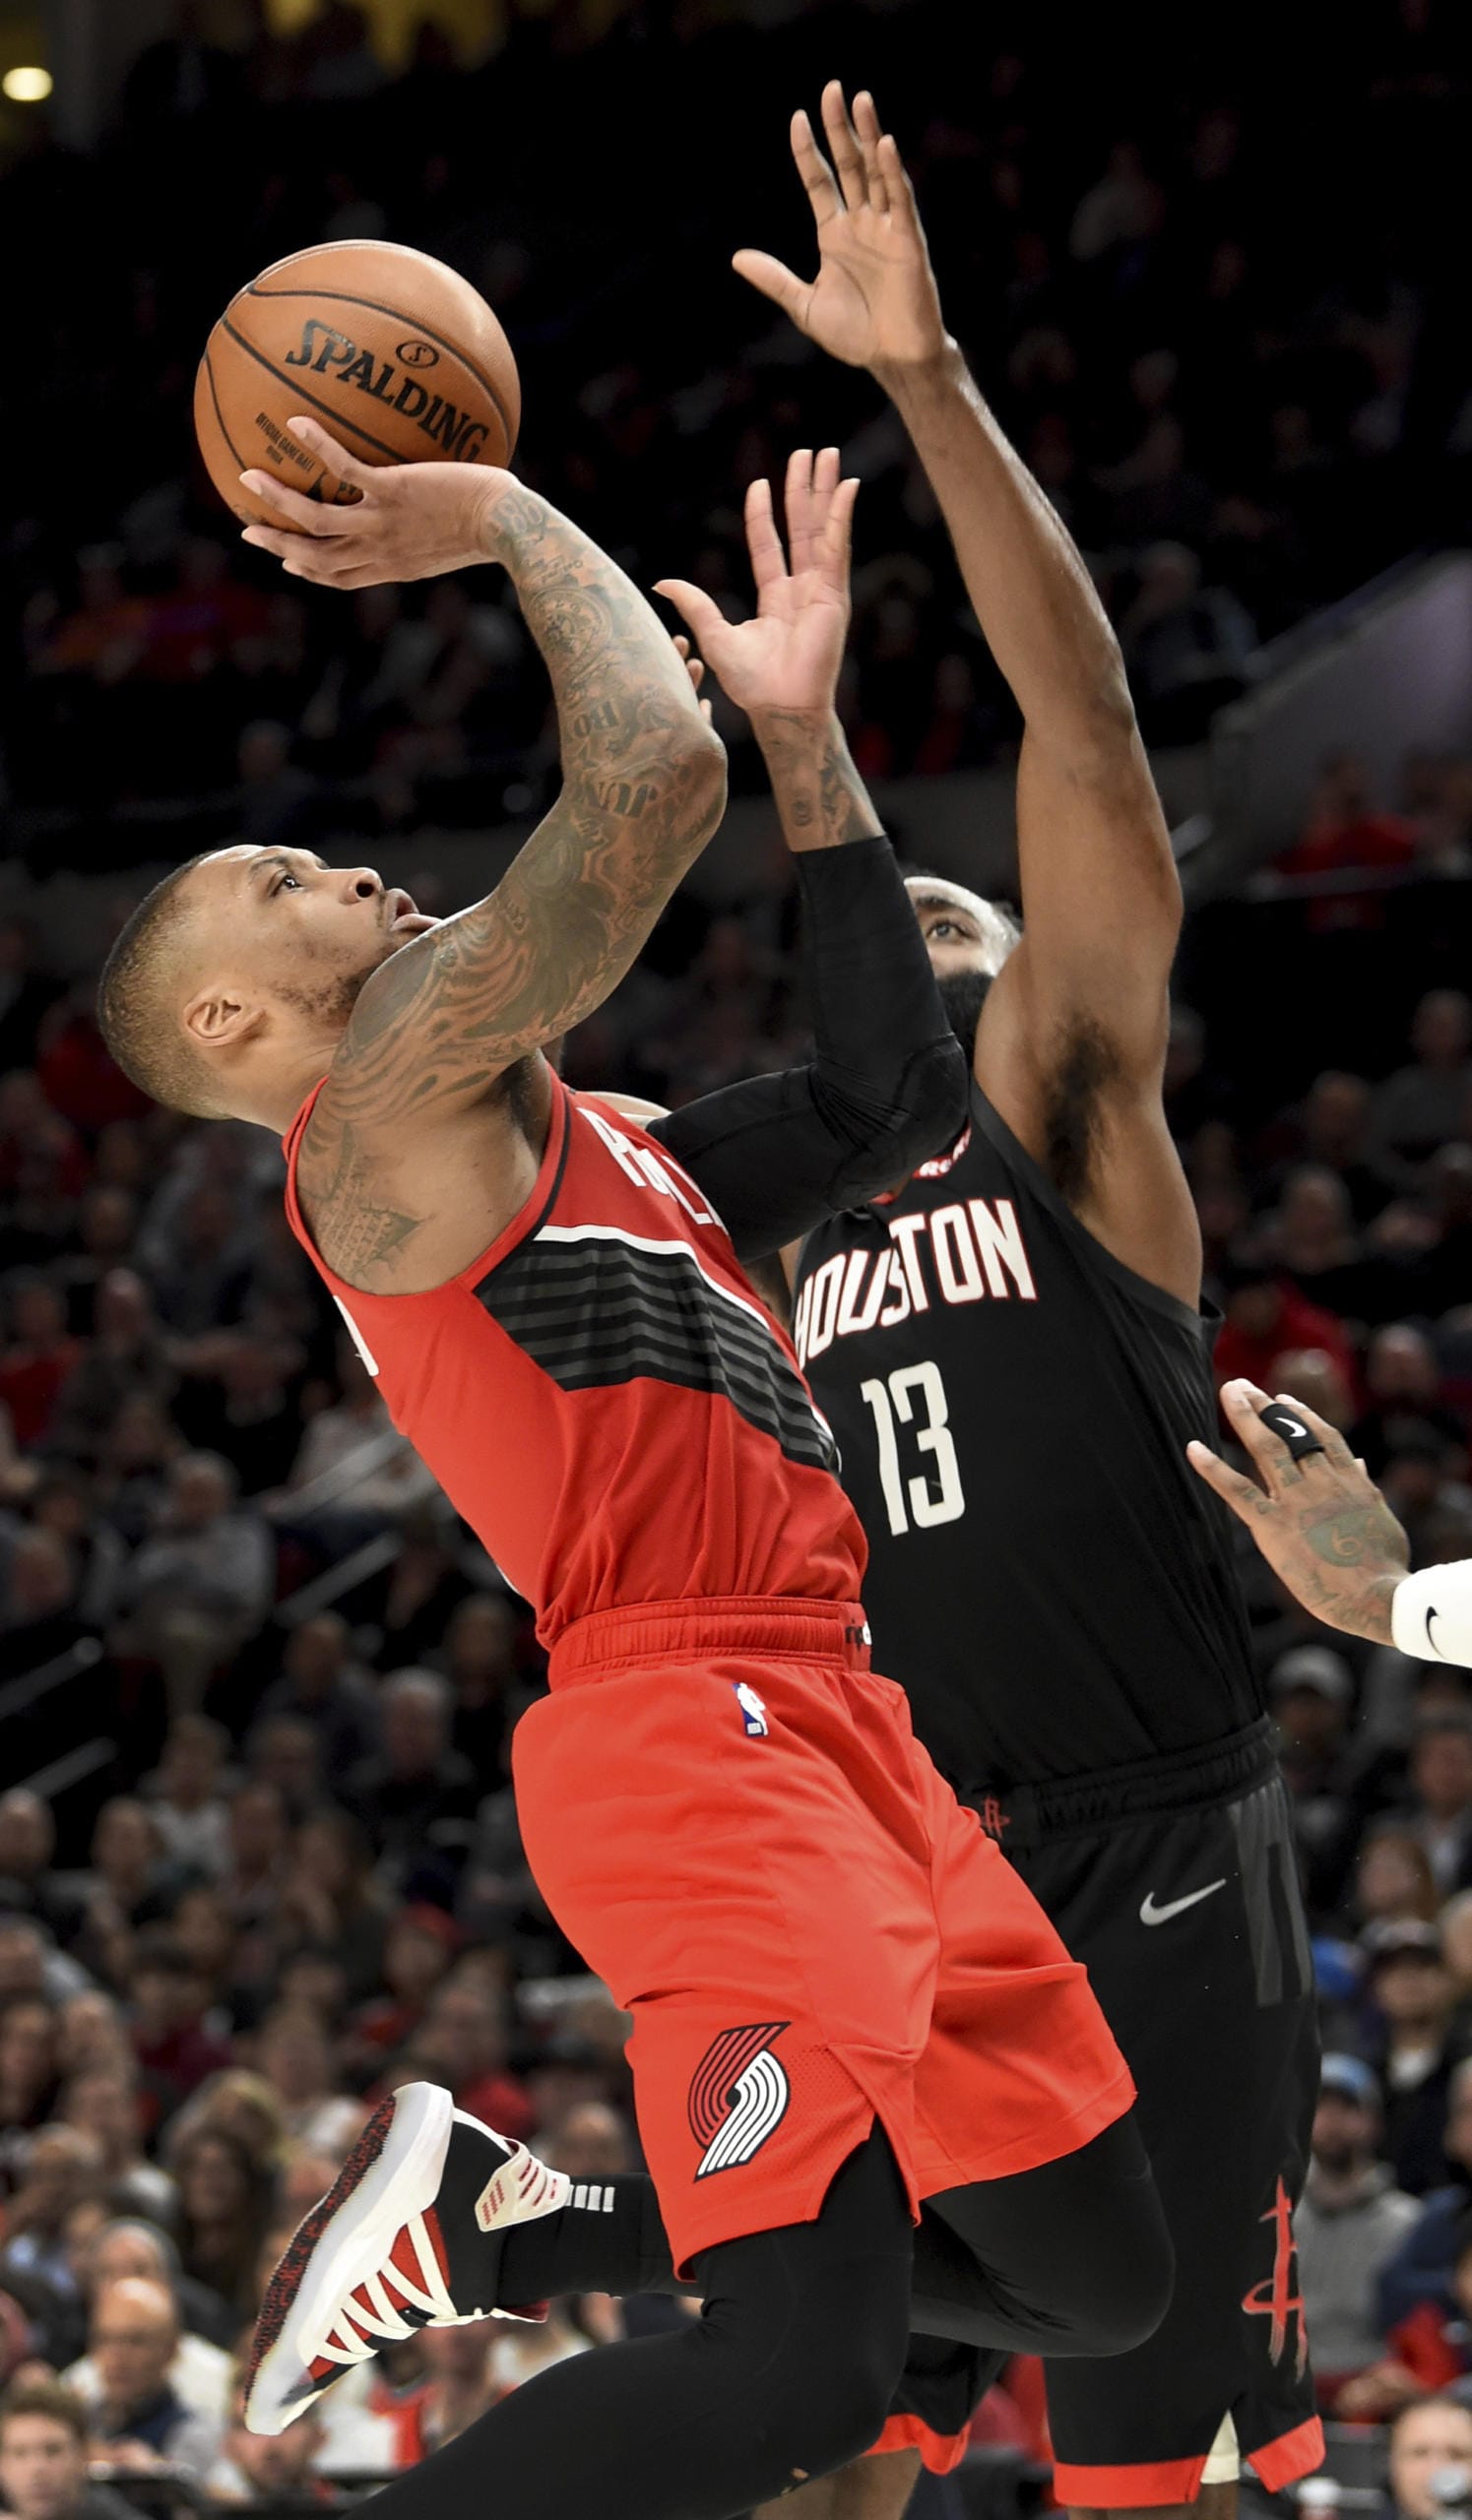 Portland Trail Blazers guard Damian Lillard, left, drives to the basket as Houston Rockets guard James Harden defends during the second half of an NBA basketball game in Portland, Ore., Wednesday, Jan. 29, 2020. The Blazers won 125-112.